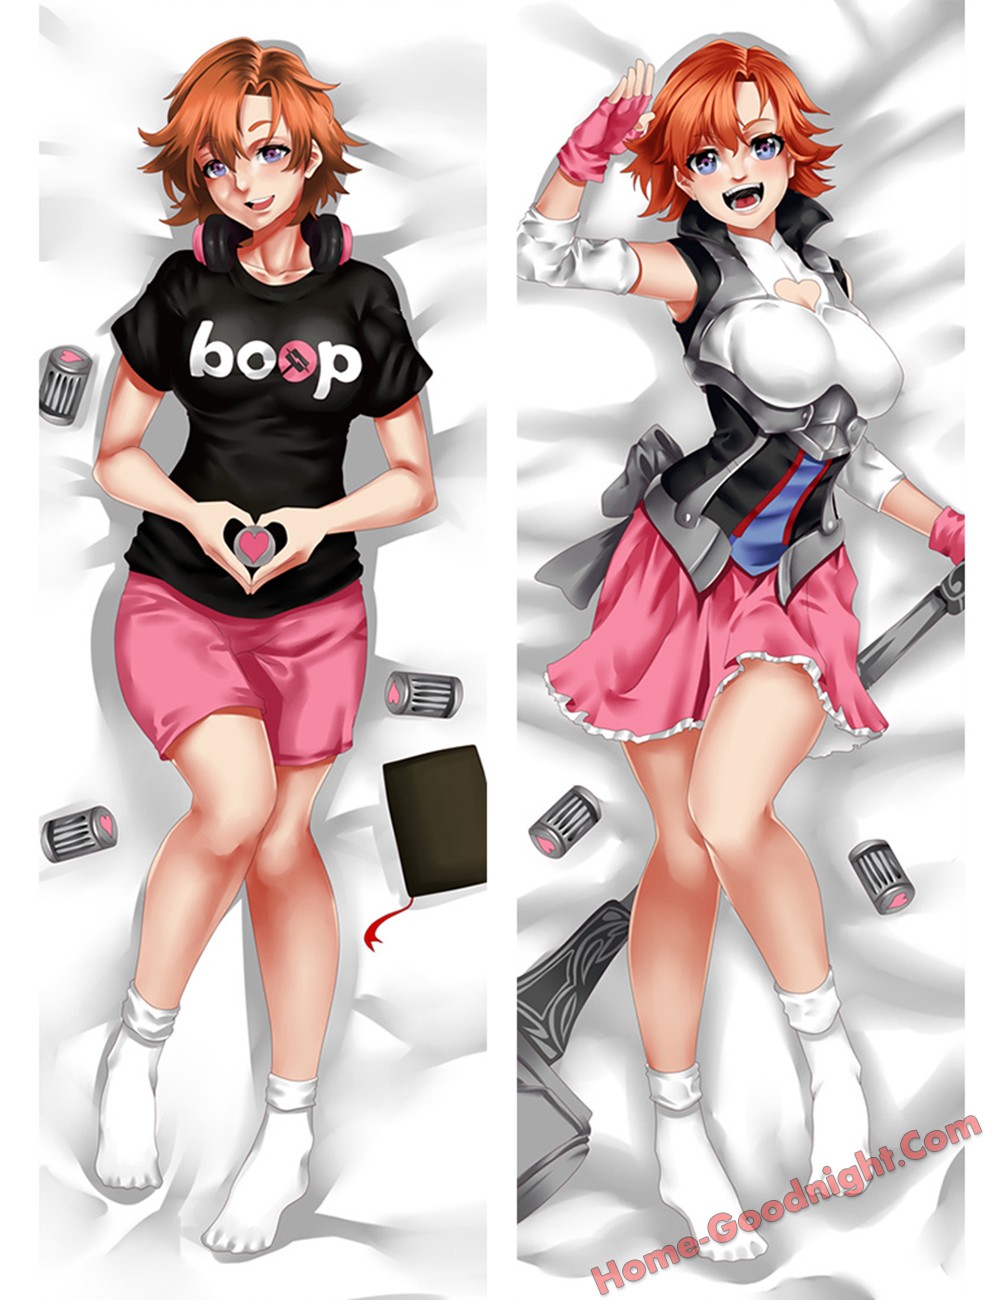 Nora Valkyrie - RWBY Long pillow anime japenese love pillow cover